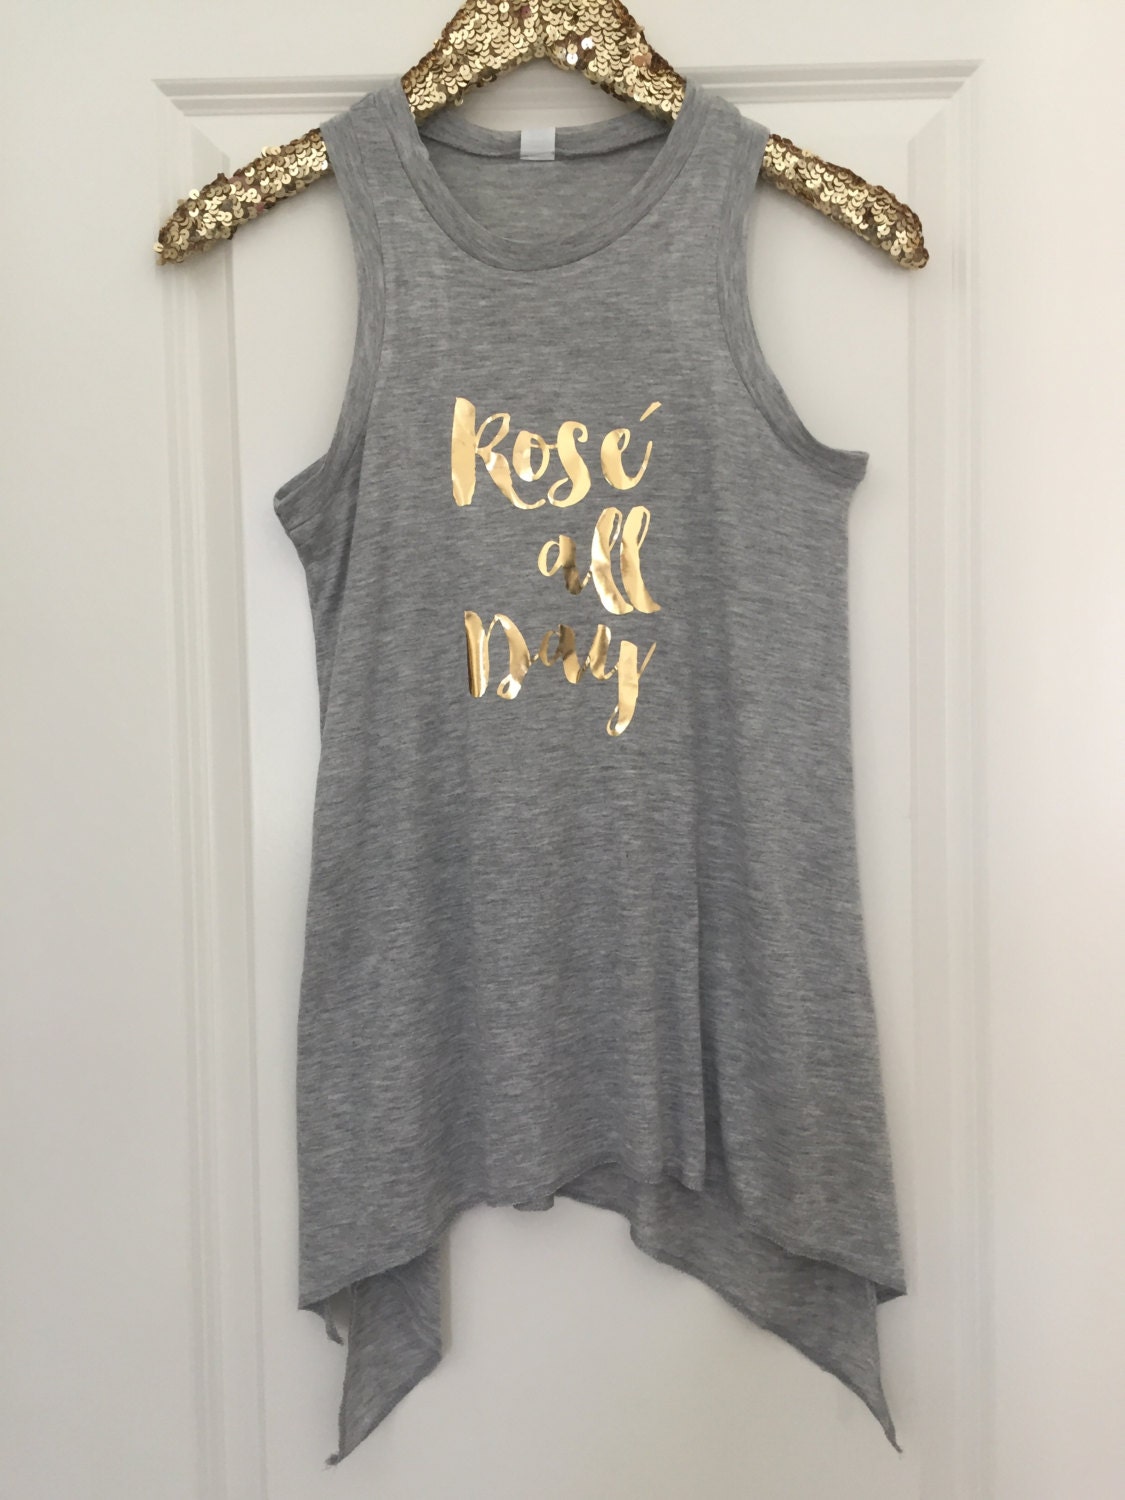 Bridal Party, Rose all Day Side Slit Tank // Bachelorette Party, Bride to be, Wedding Gift, Champagne, Tribe, Squad, Birthday / 3302P